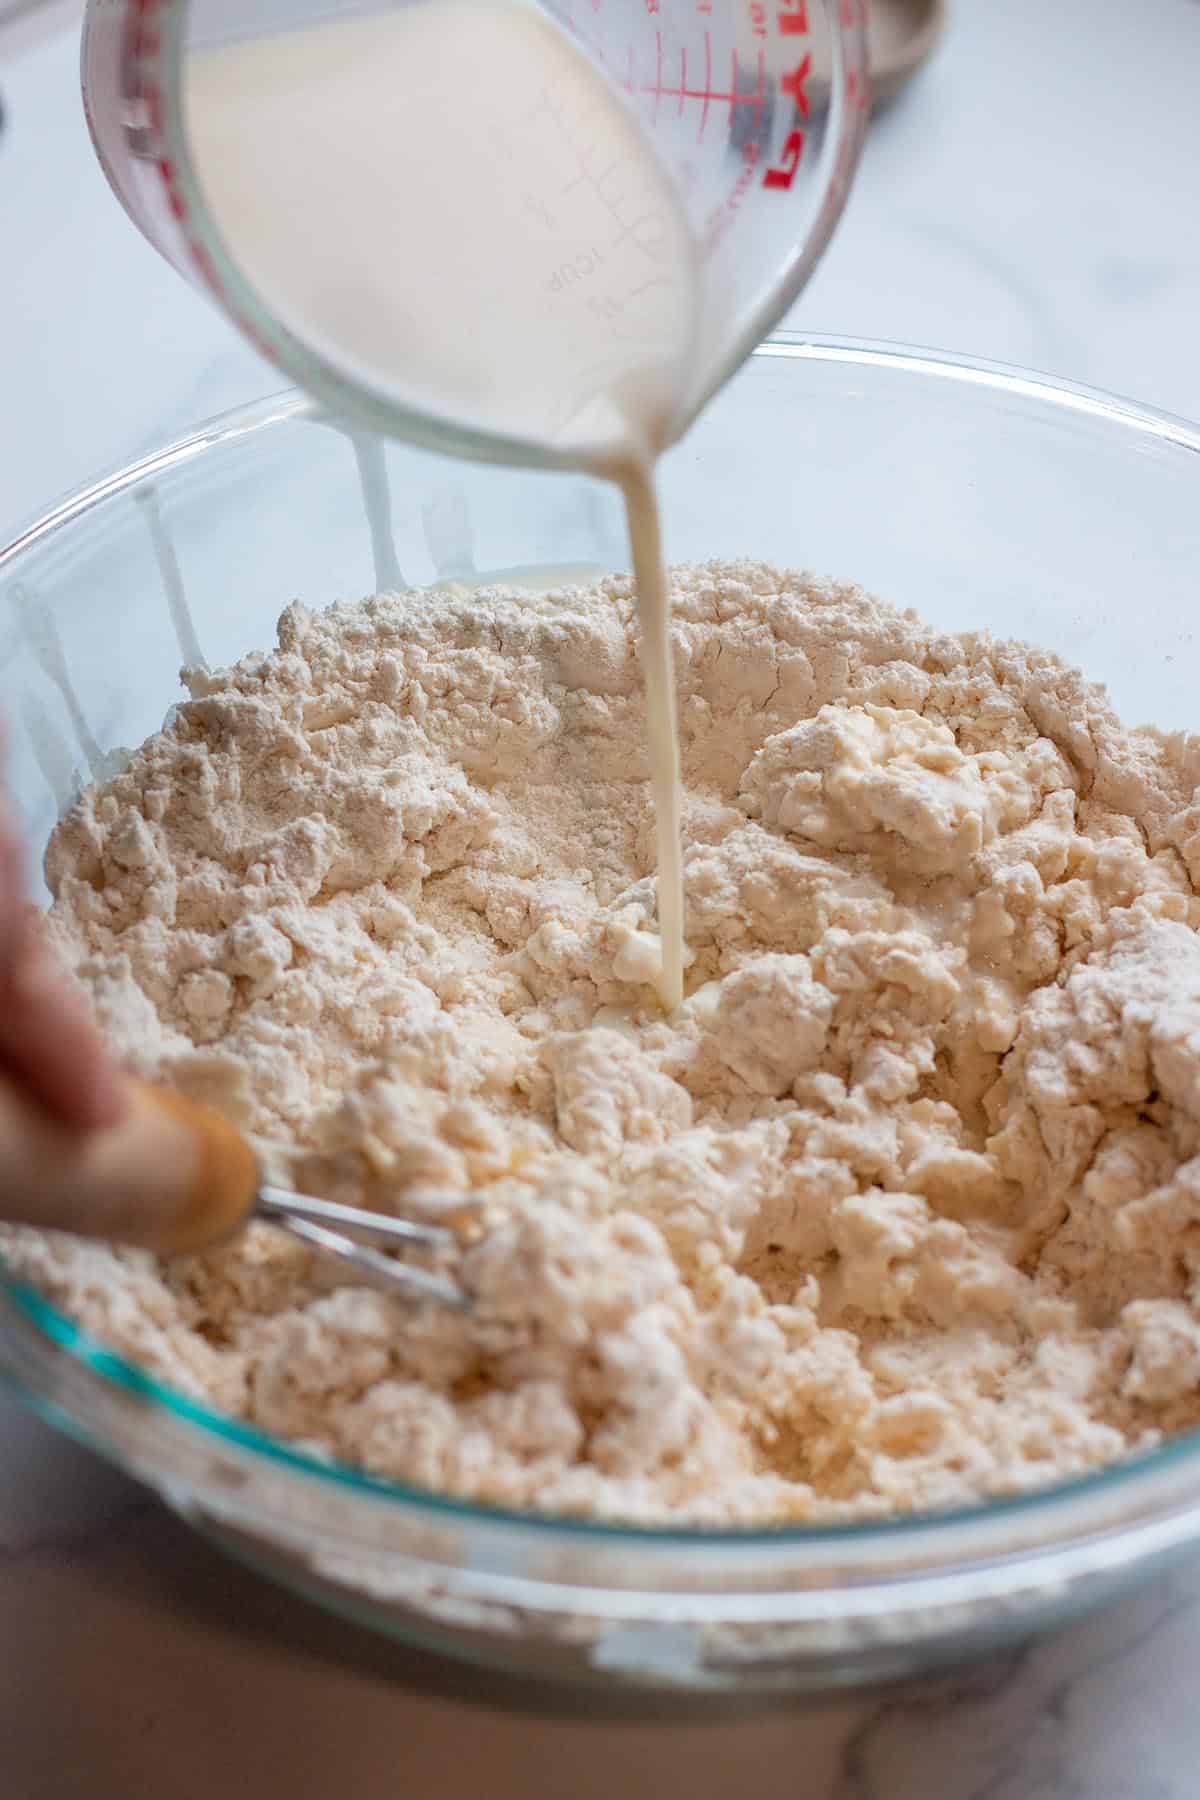 Milk being poured into a flour mix.